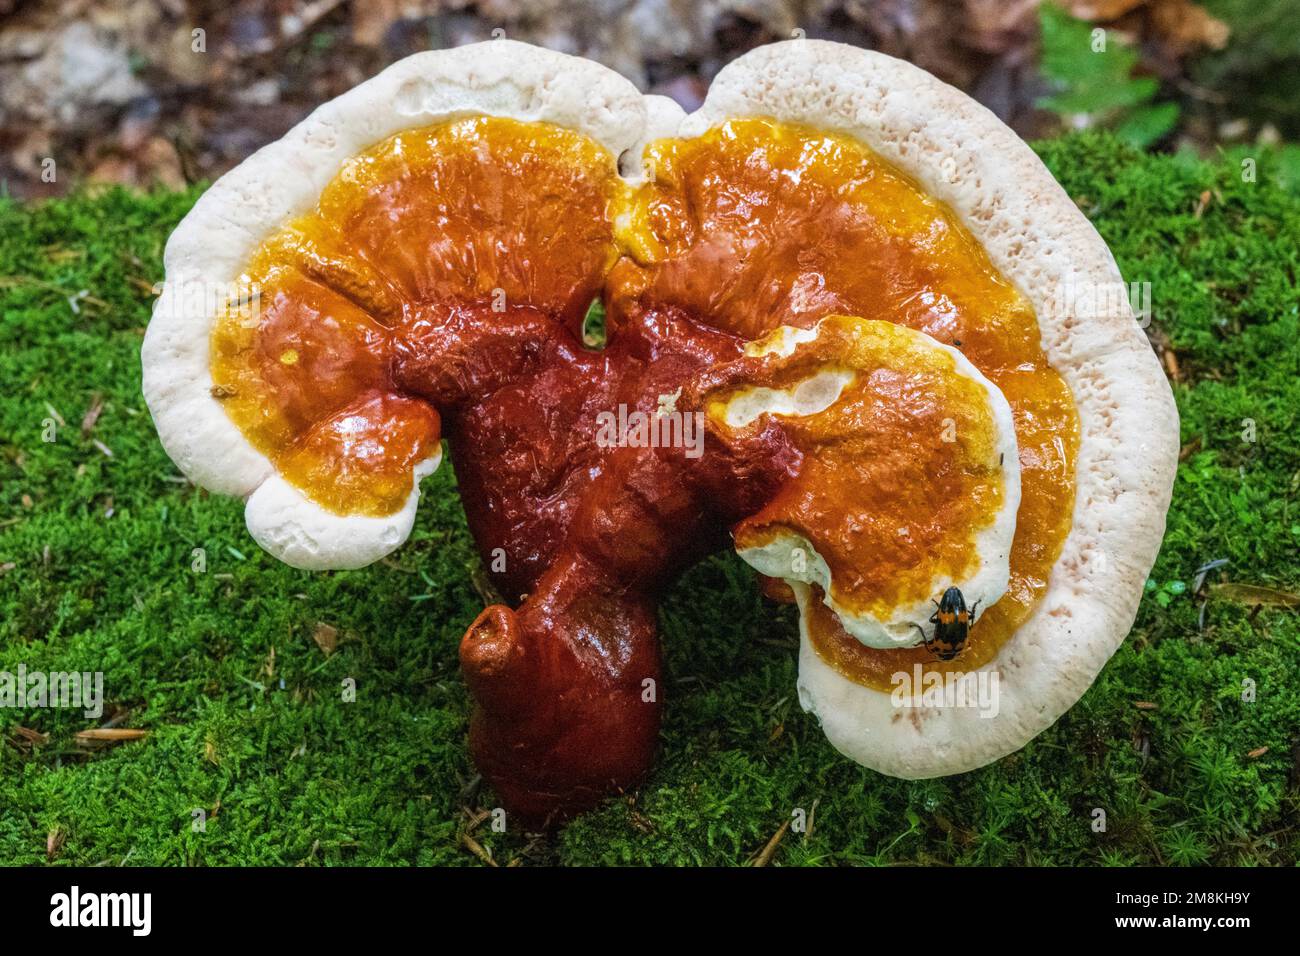 Mushroom In an old Growth Forest Stock Photo